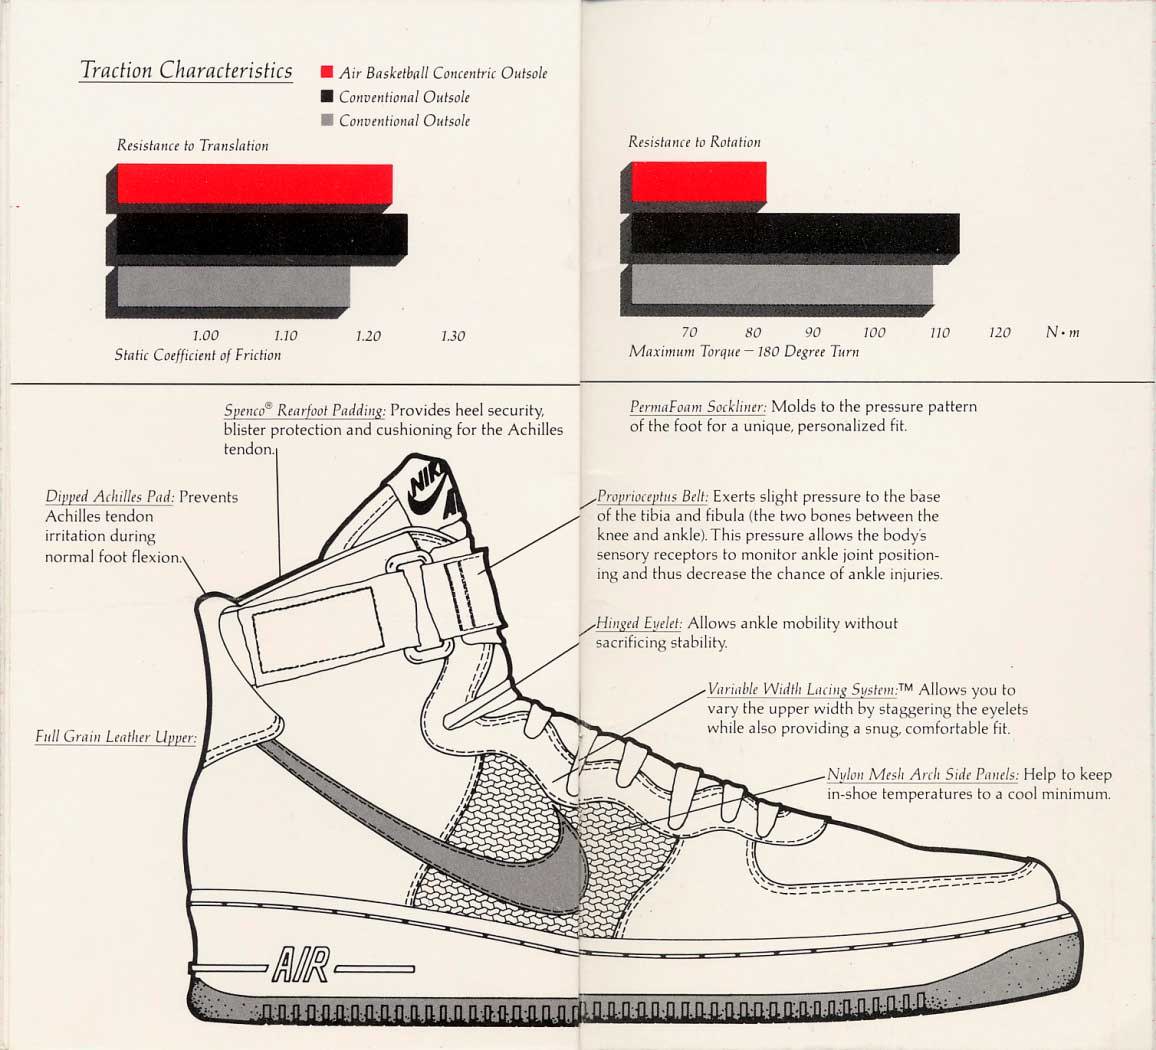 Are the air max or air force 1s better basketball? I really like the air  force 1s but I need a good mobility shoe. : r/Nike